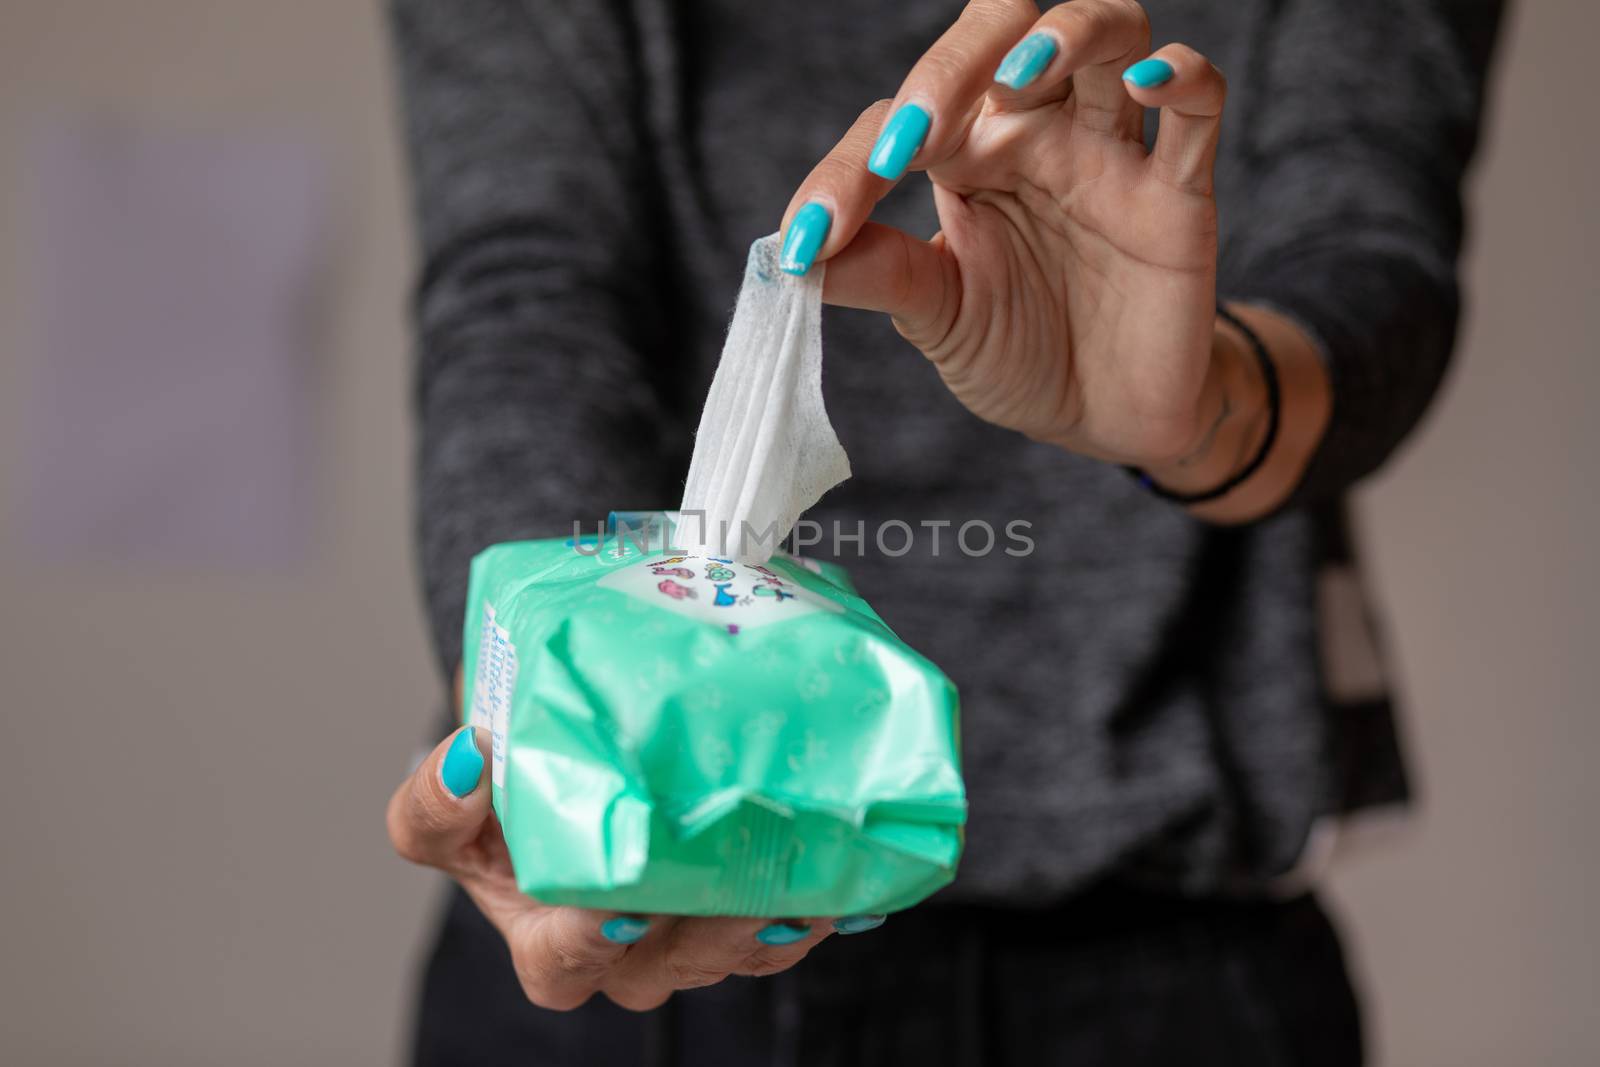 Old woman hand with turquoise nails taking the wet wipe to clean skin or surface stock photo